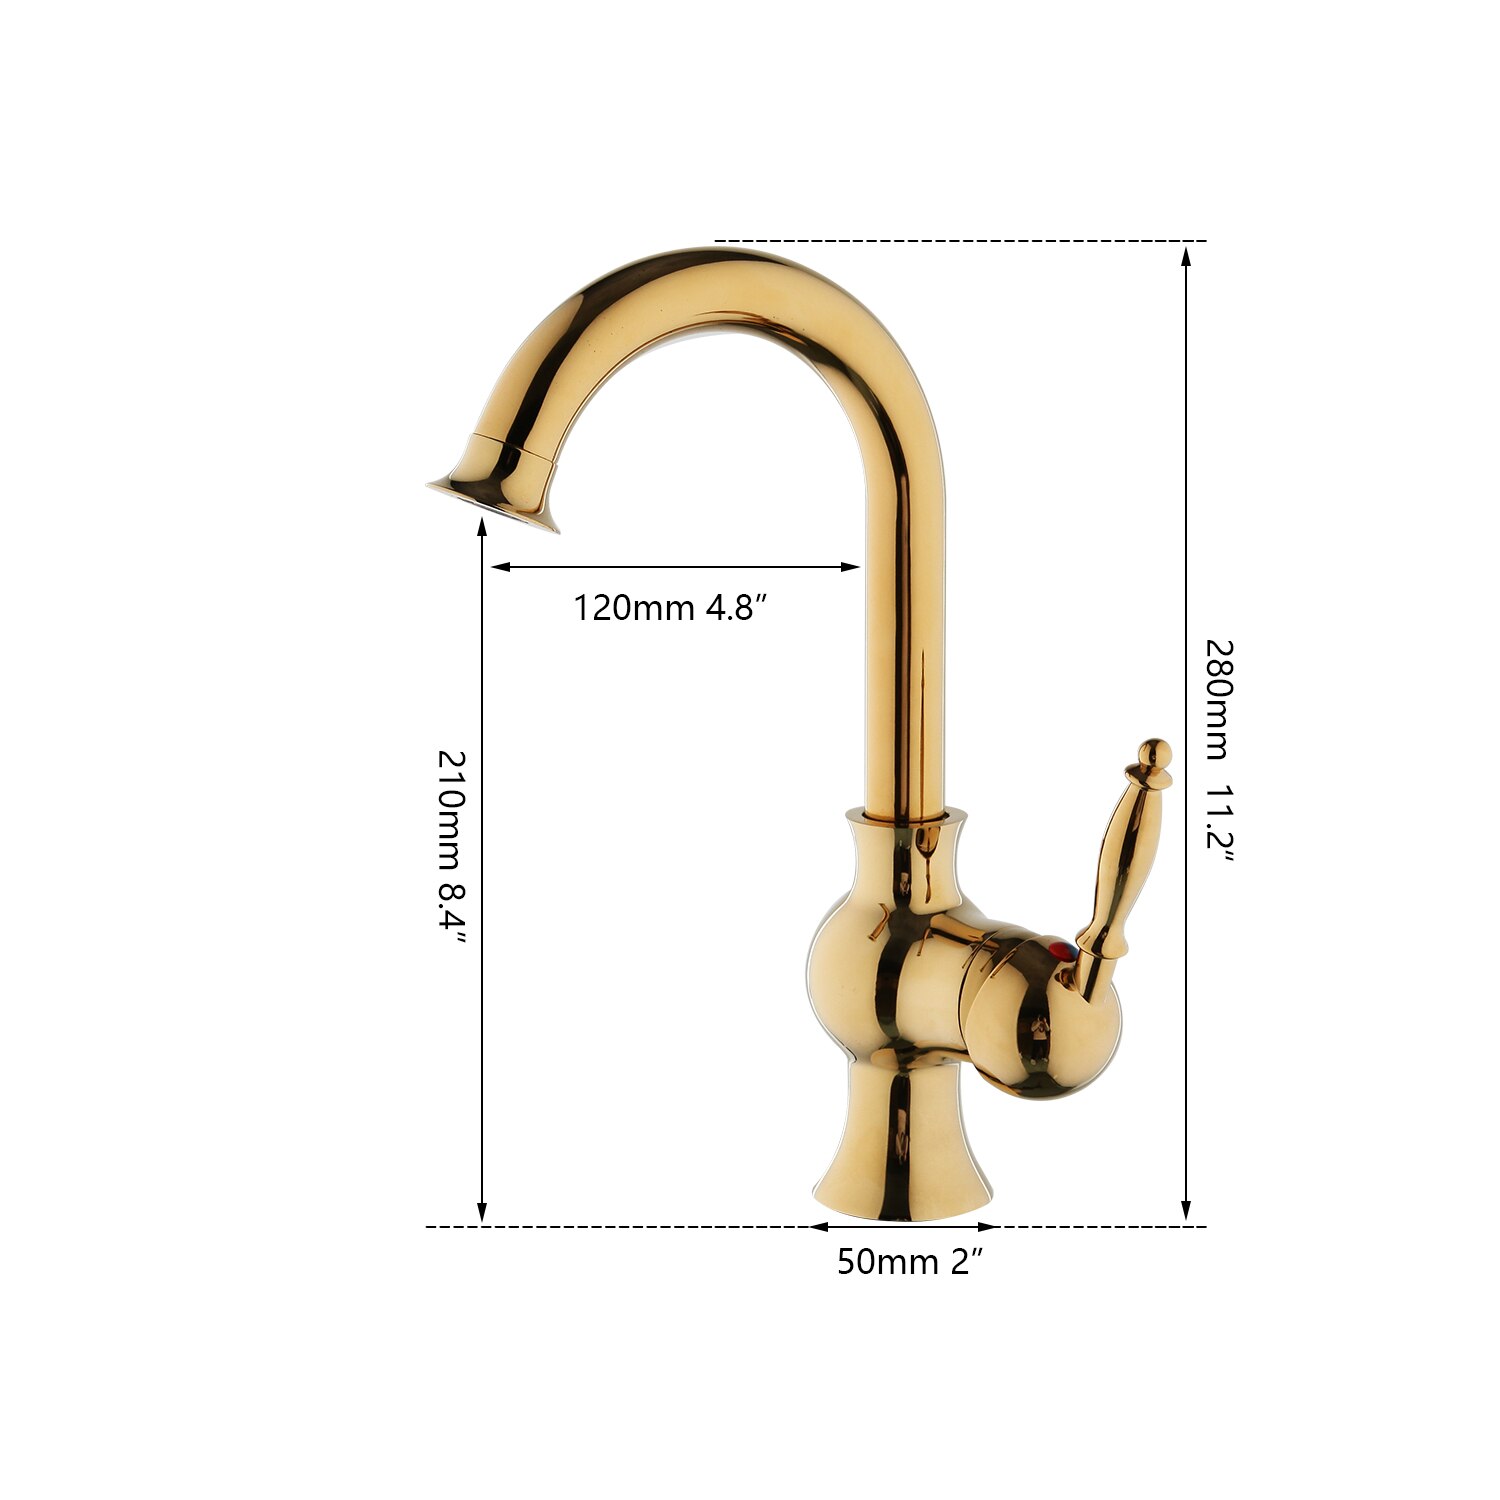 Classic Gold Basin Faucet Gold Water Taps & Faucets